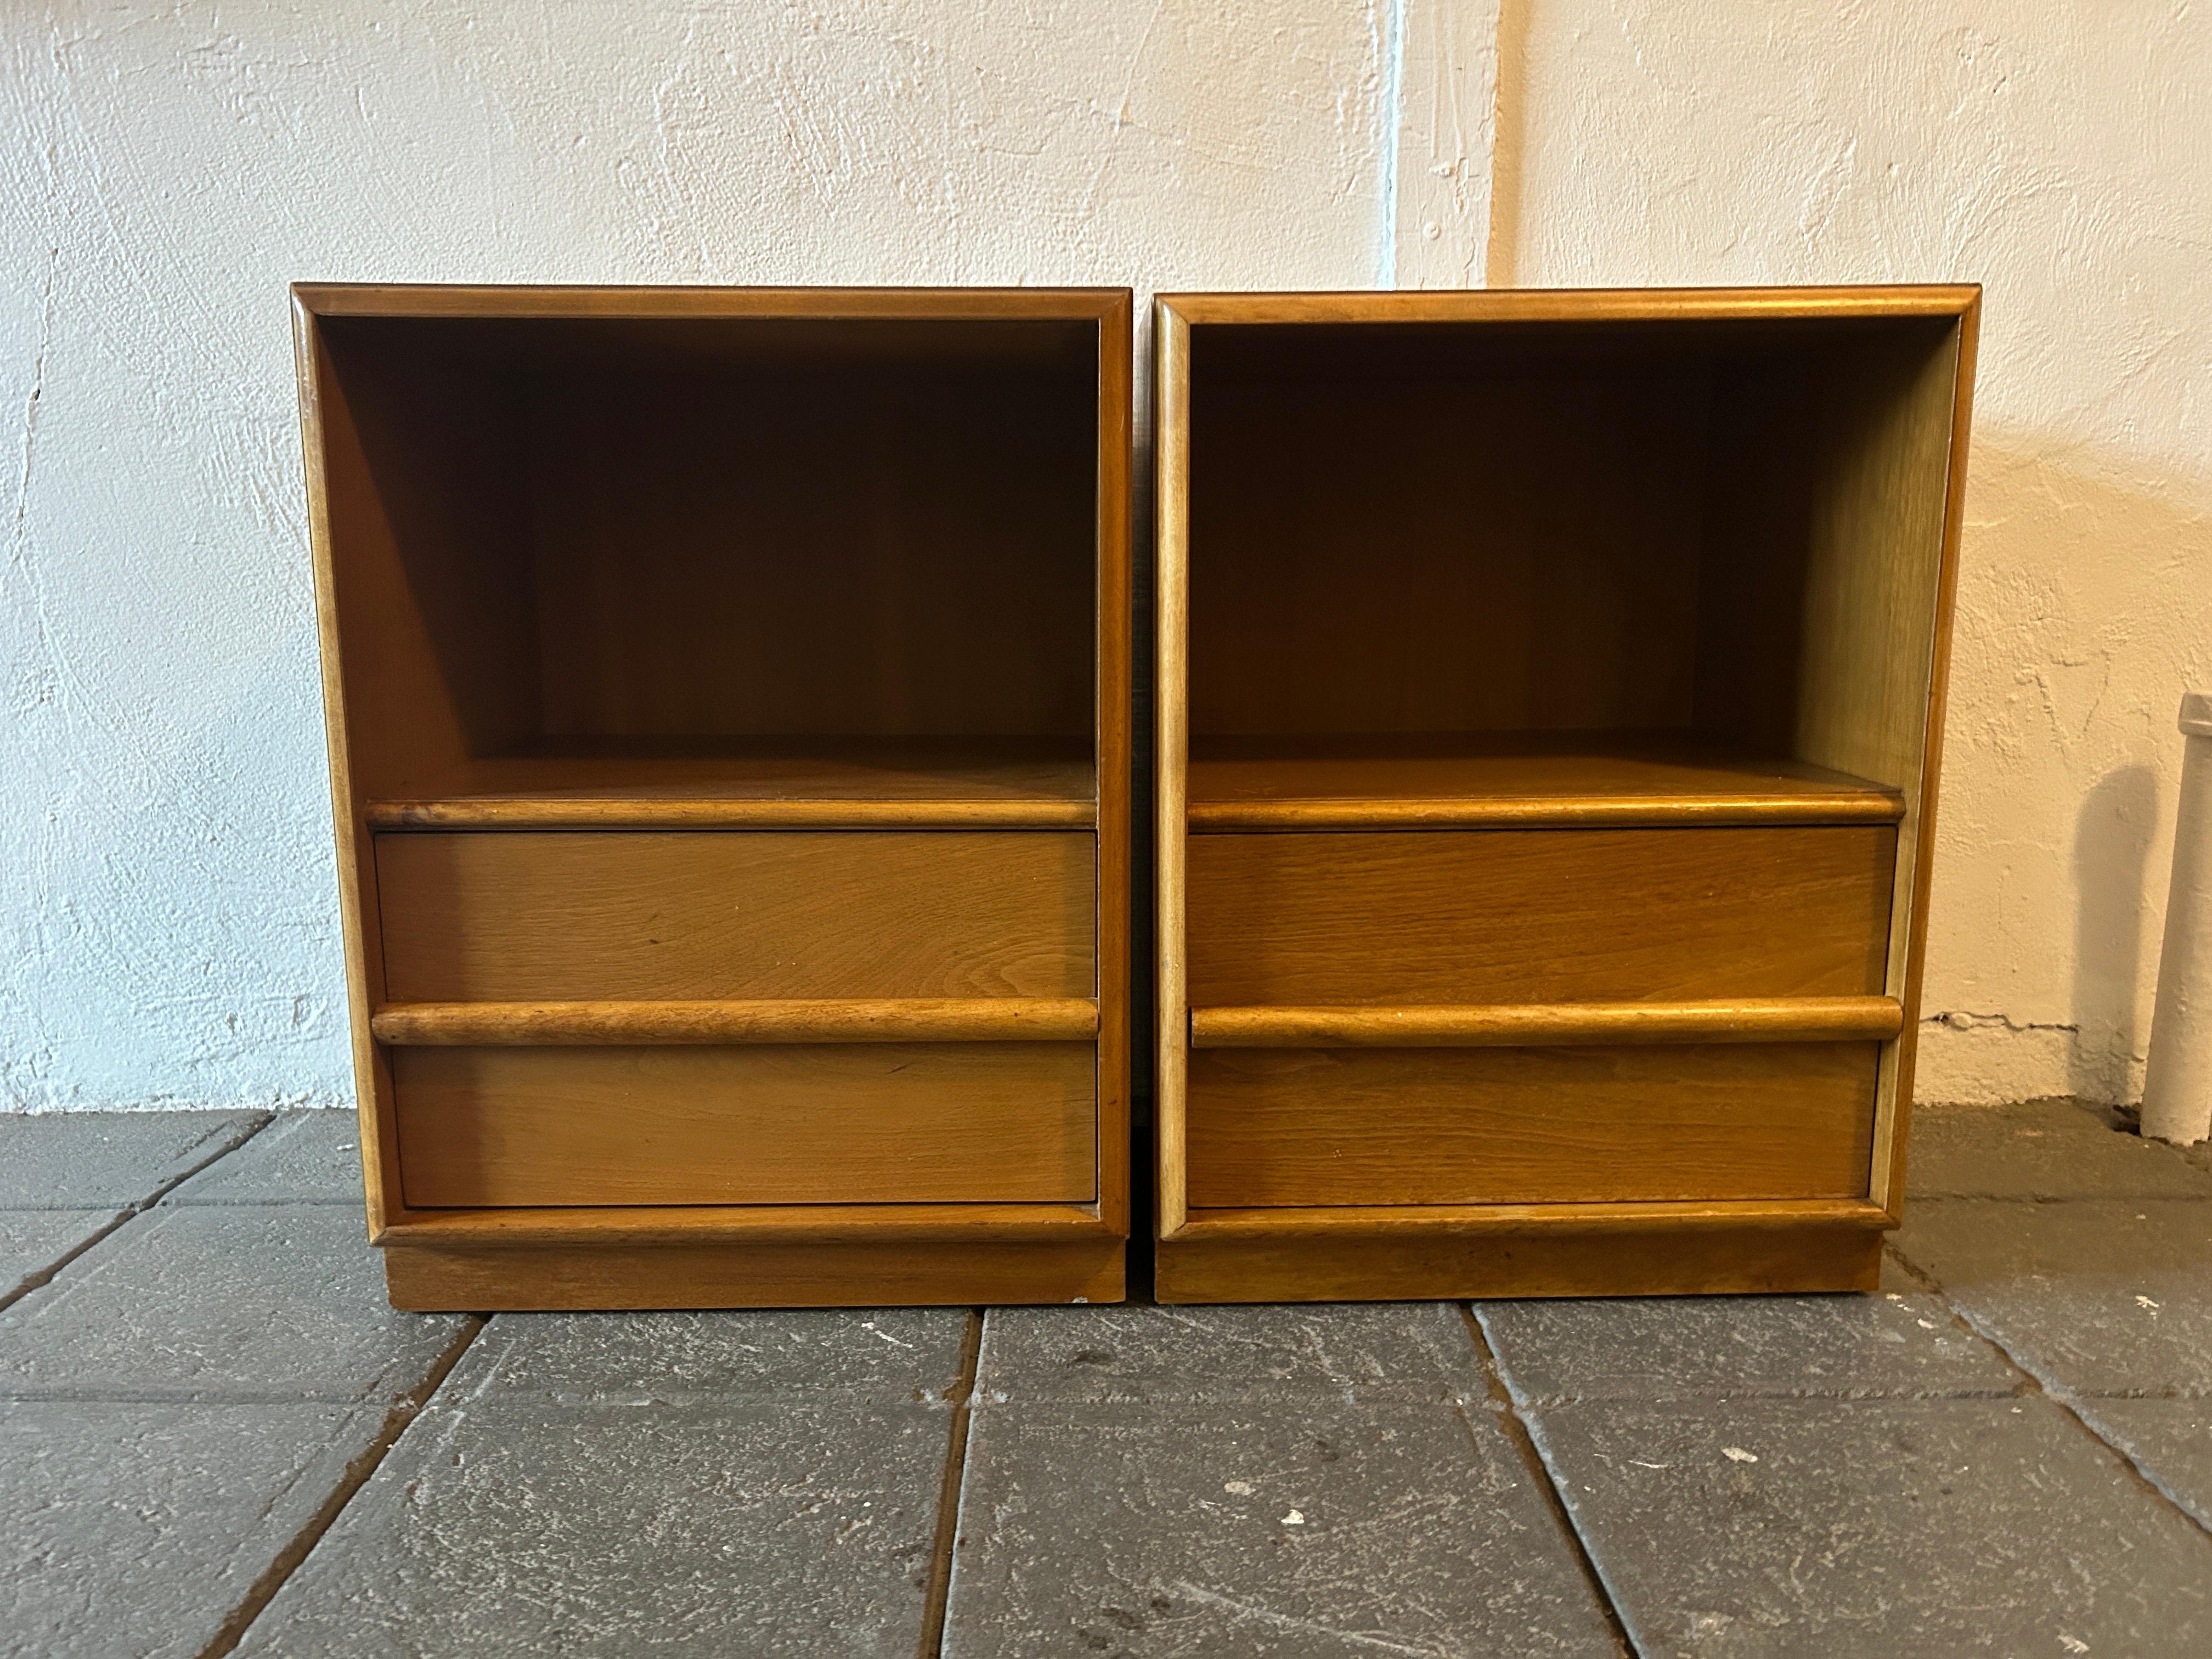 Beautiful pair of single drawer blonde maple nightstands by T.H. Robsjohn-Gibbings for Widdicomb - Great vintage condition - Shows little signs of use and slight fading. Label Widdicomb inside top drawer. Located in Brooklyn NYC.

Measures: 19